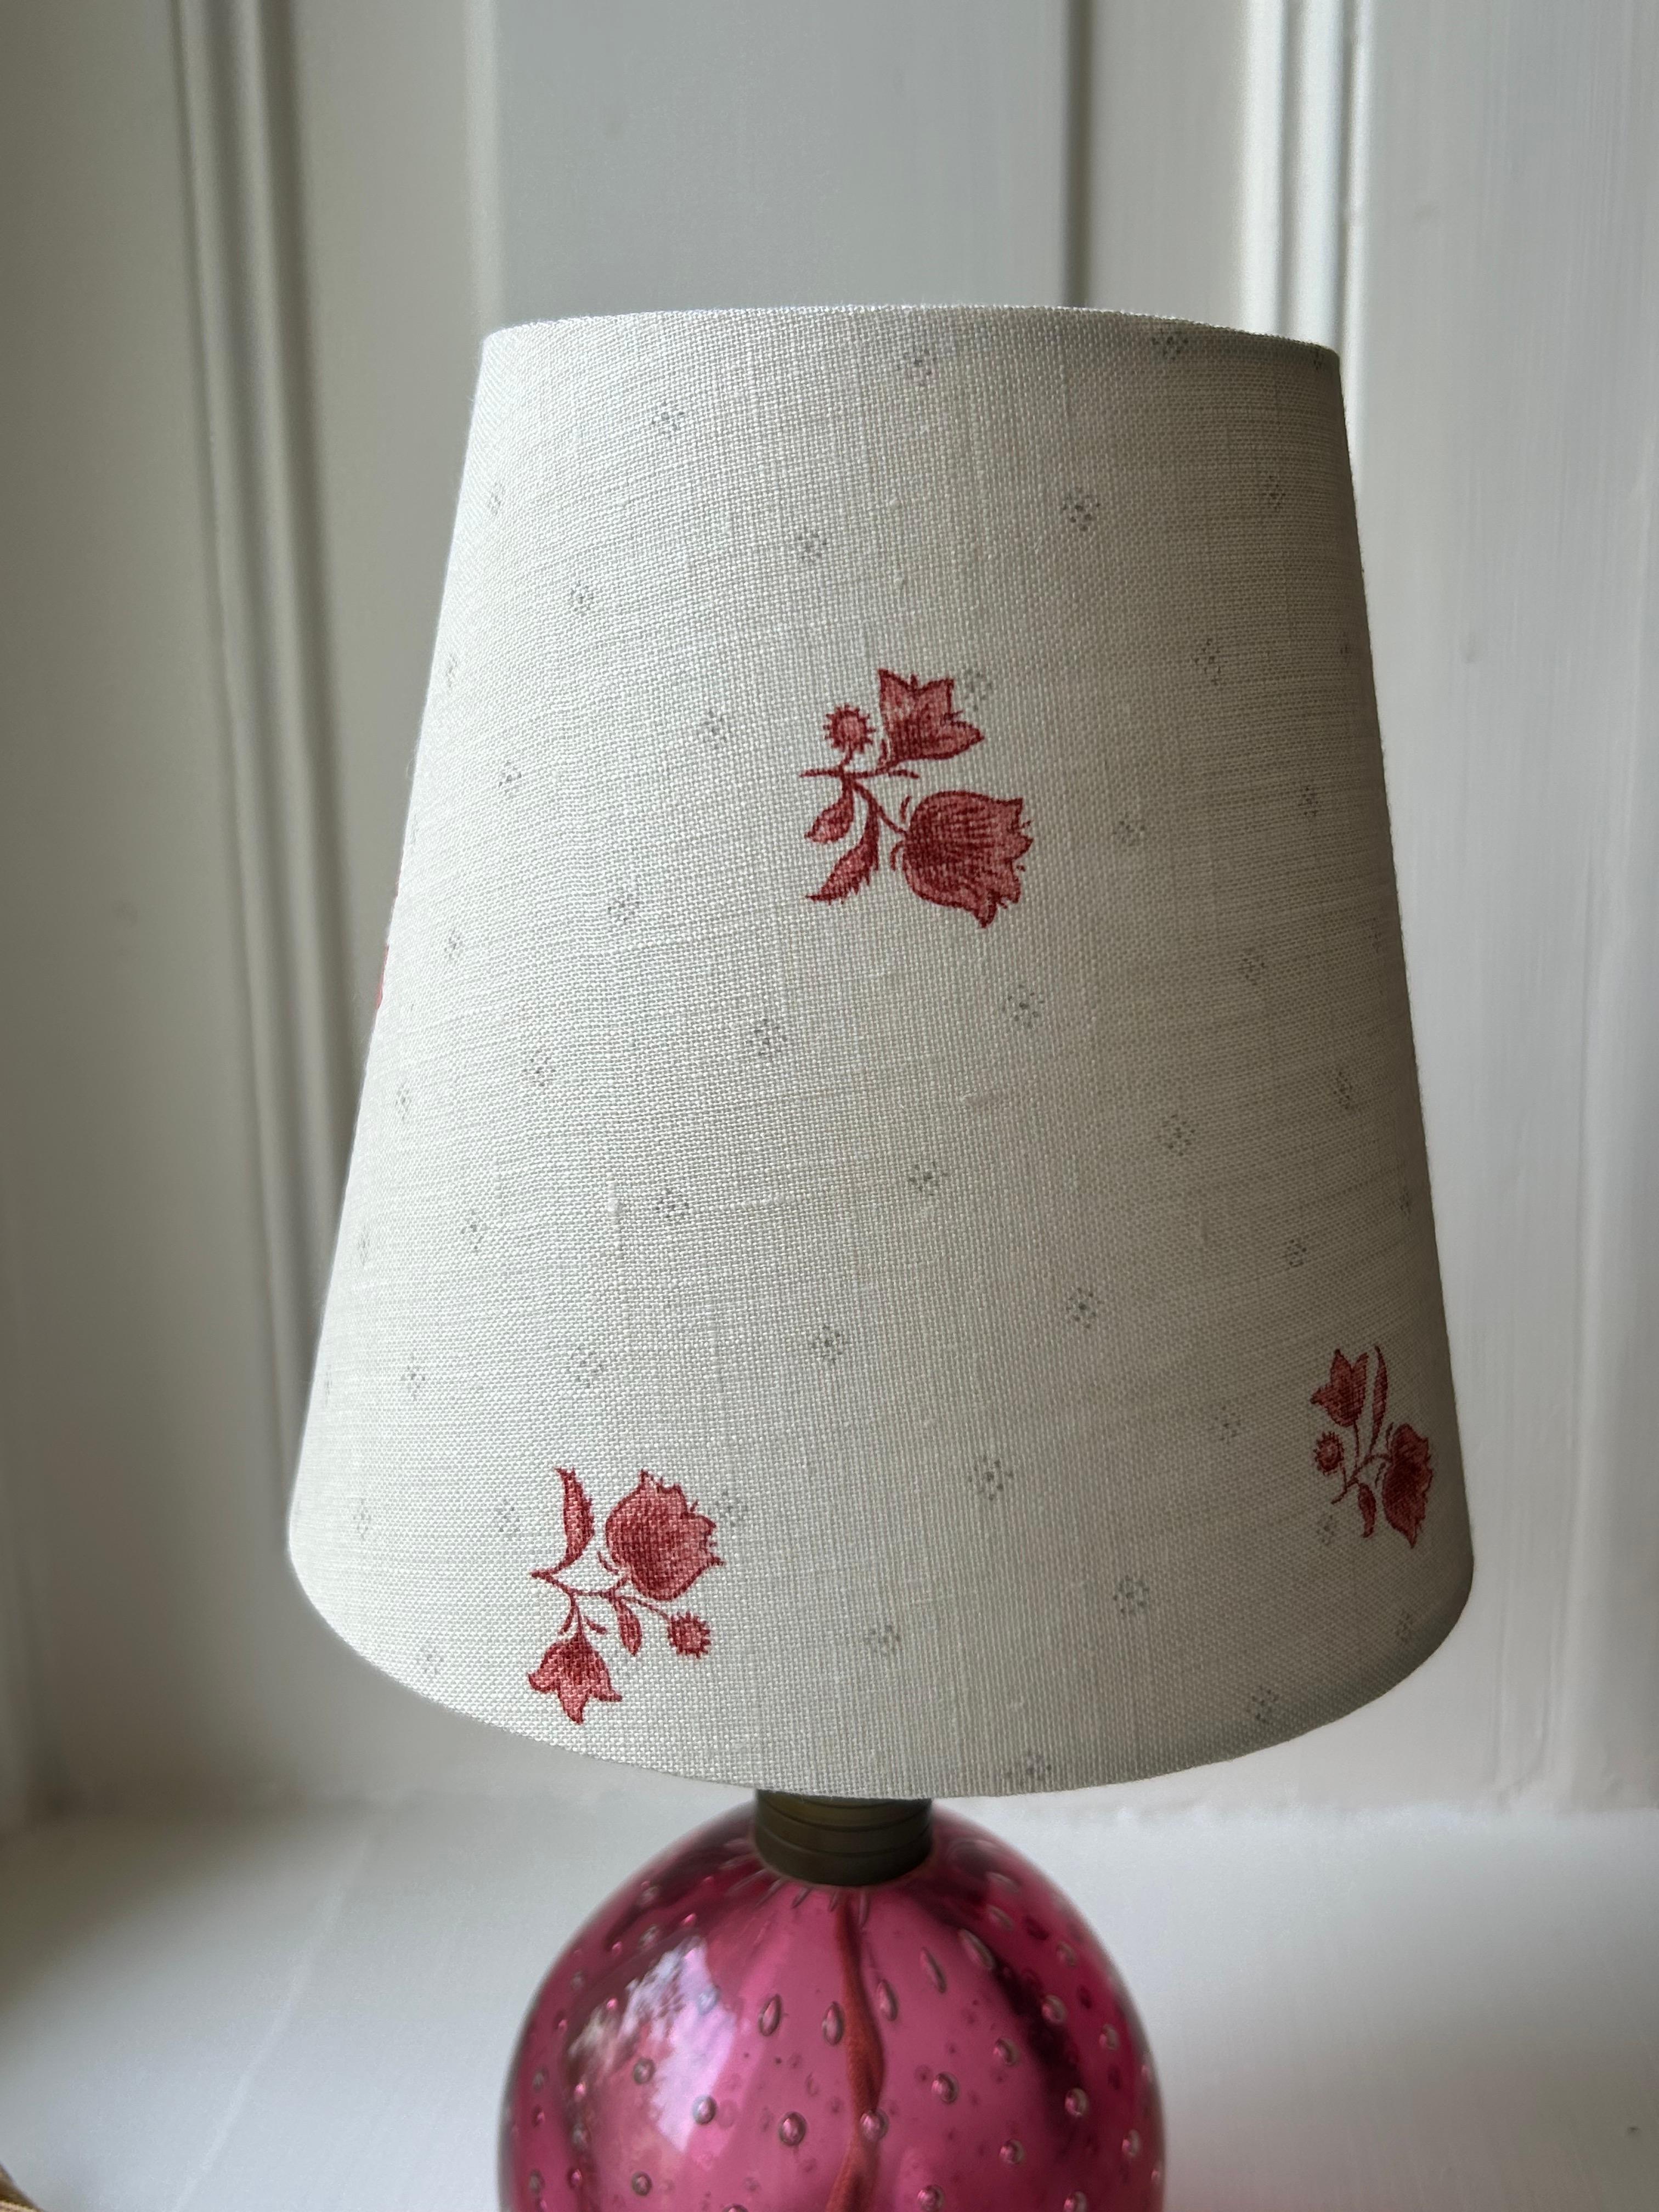 Mid-20th Century Vintage Murano Table Lamp in Pink with Customized Floral Shade, Italy, 1950s For Sale